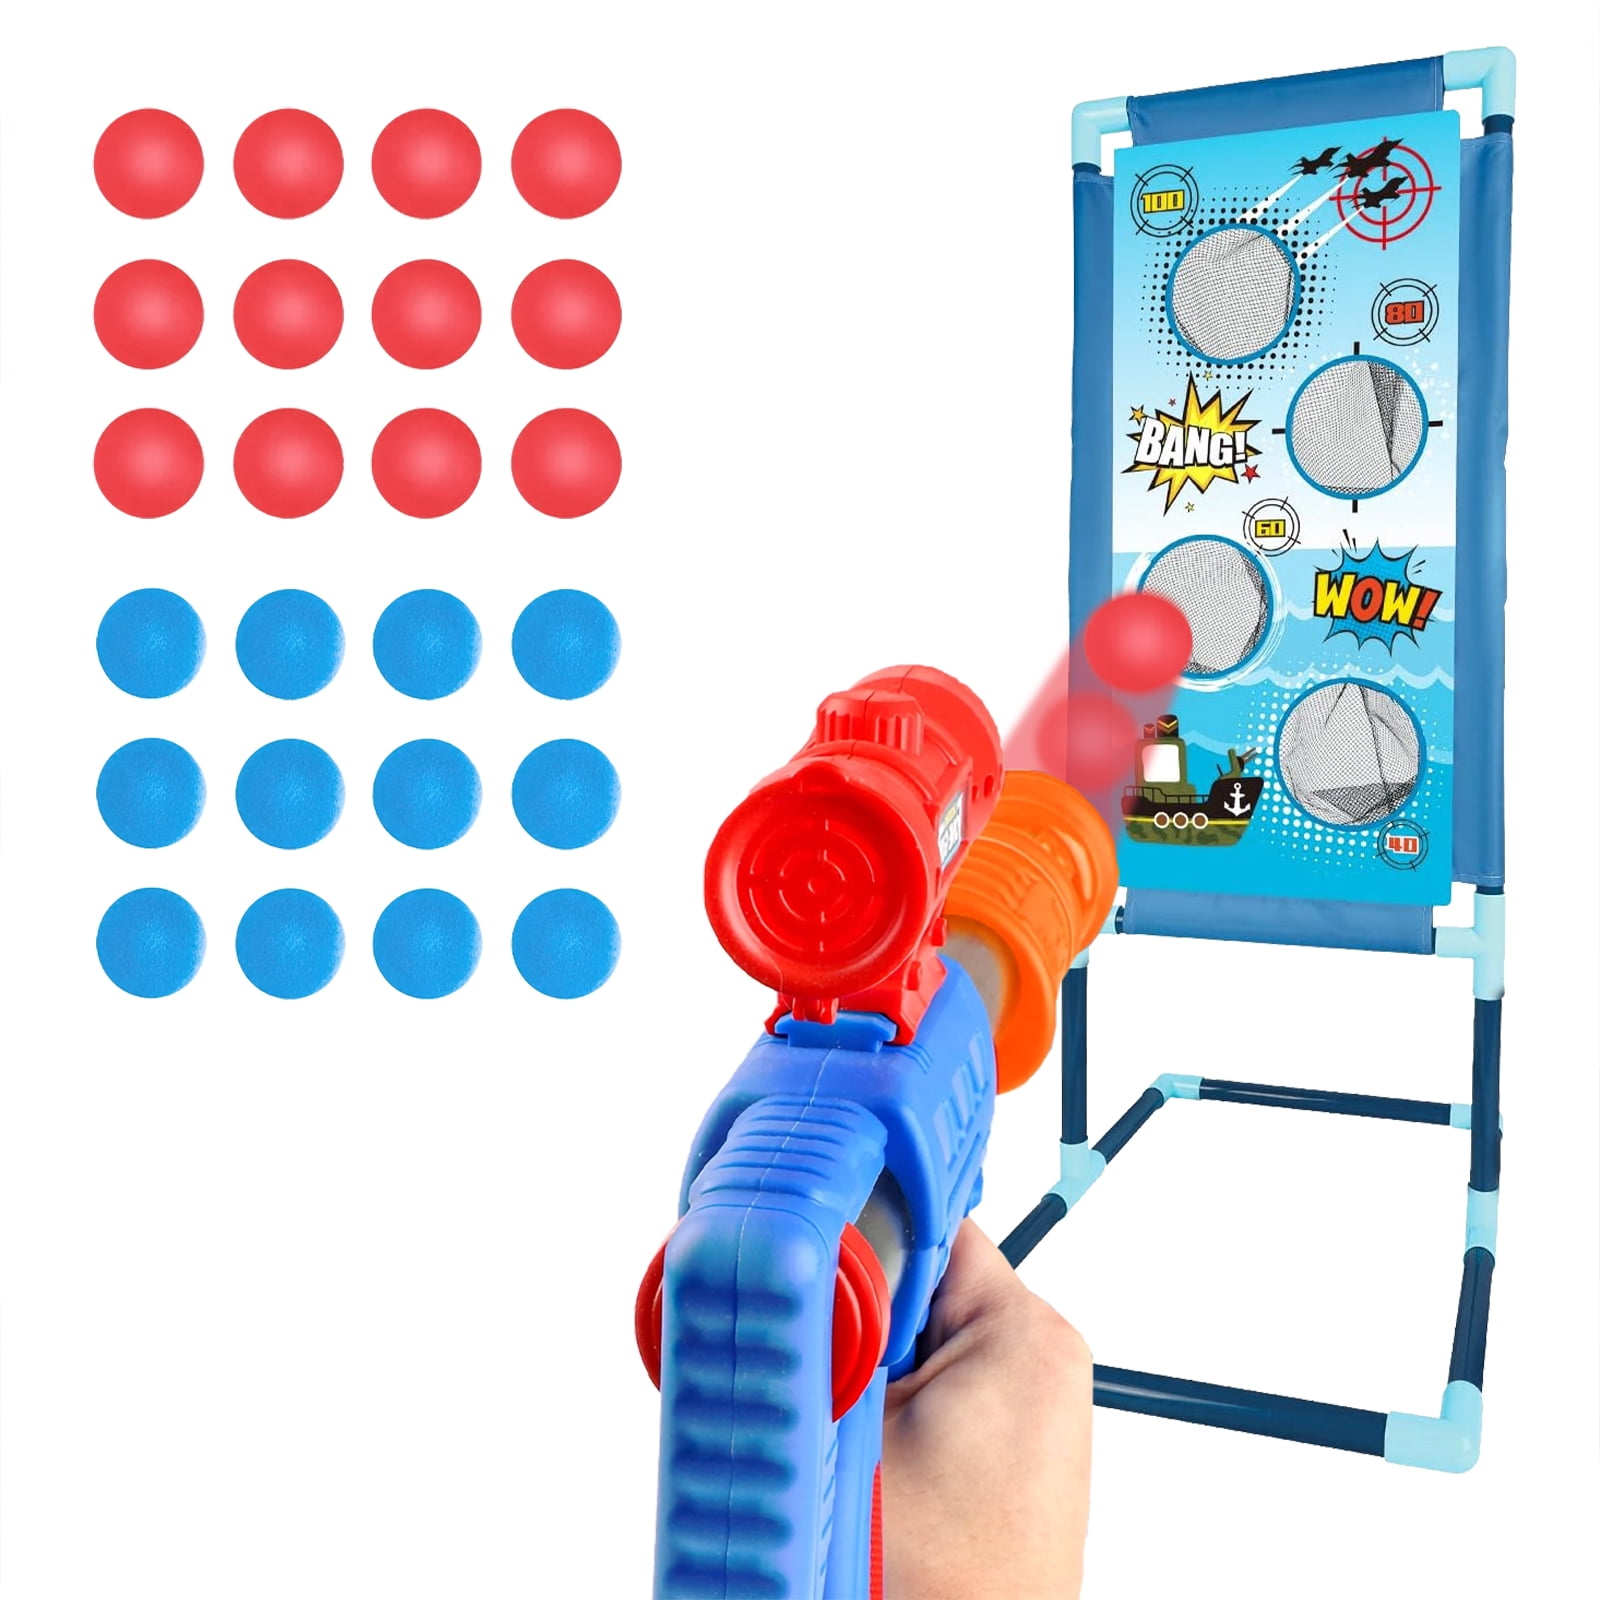 Shooting Game Toy for Age 6, 7, 8,9,10+ Years Old Kids, Boys - 2